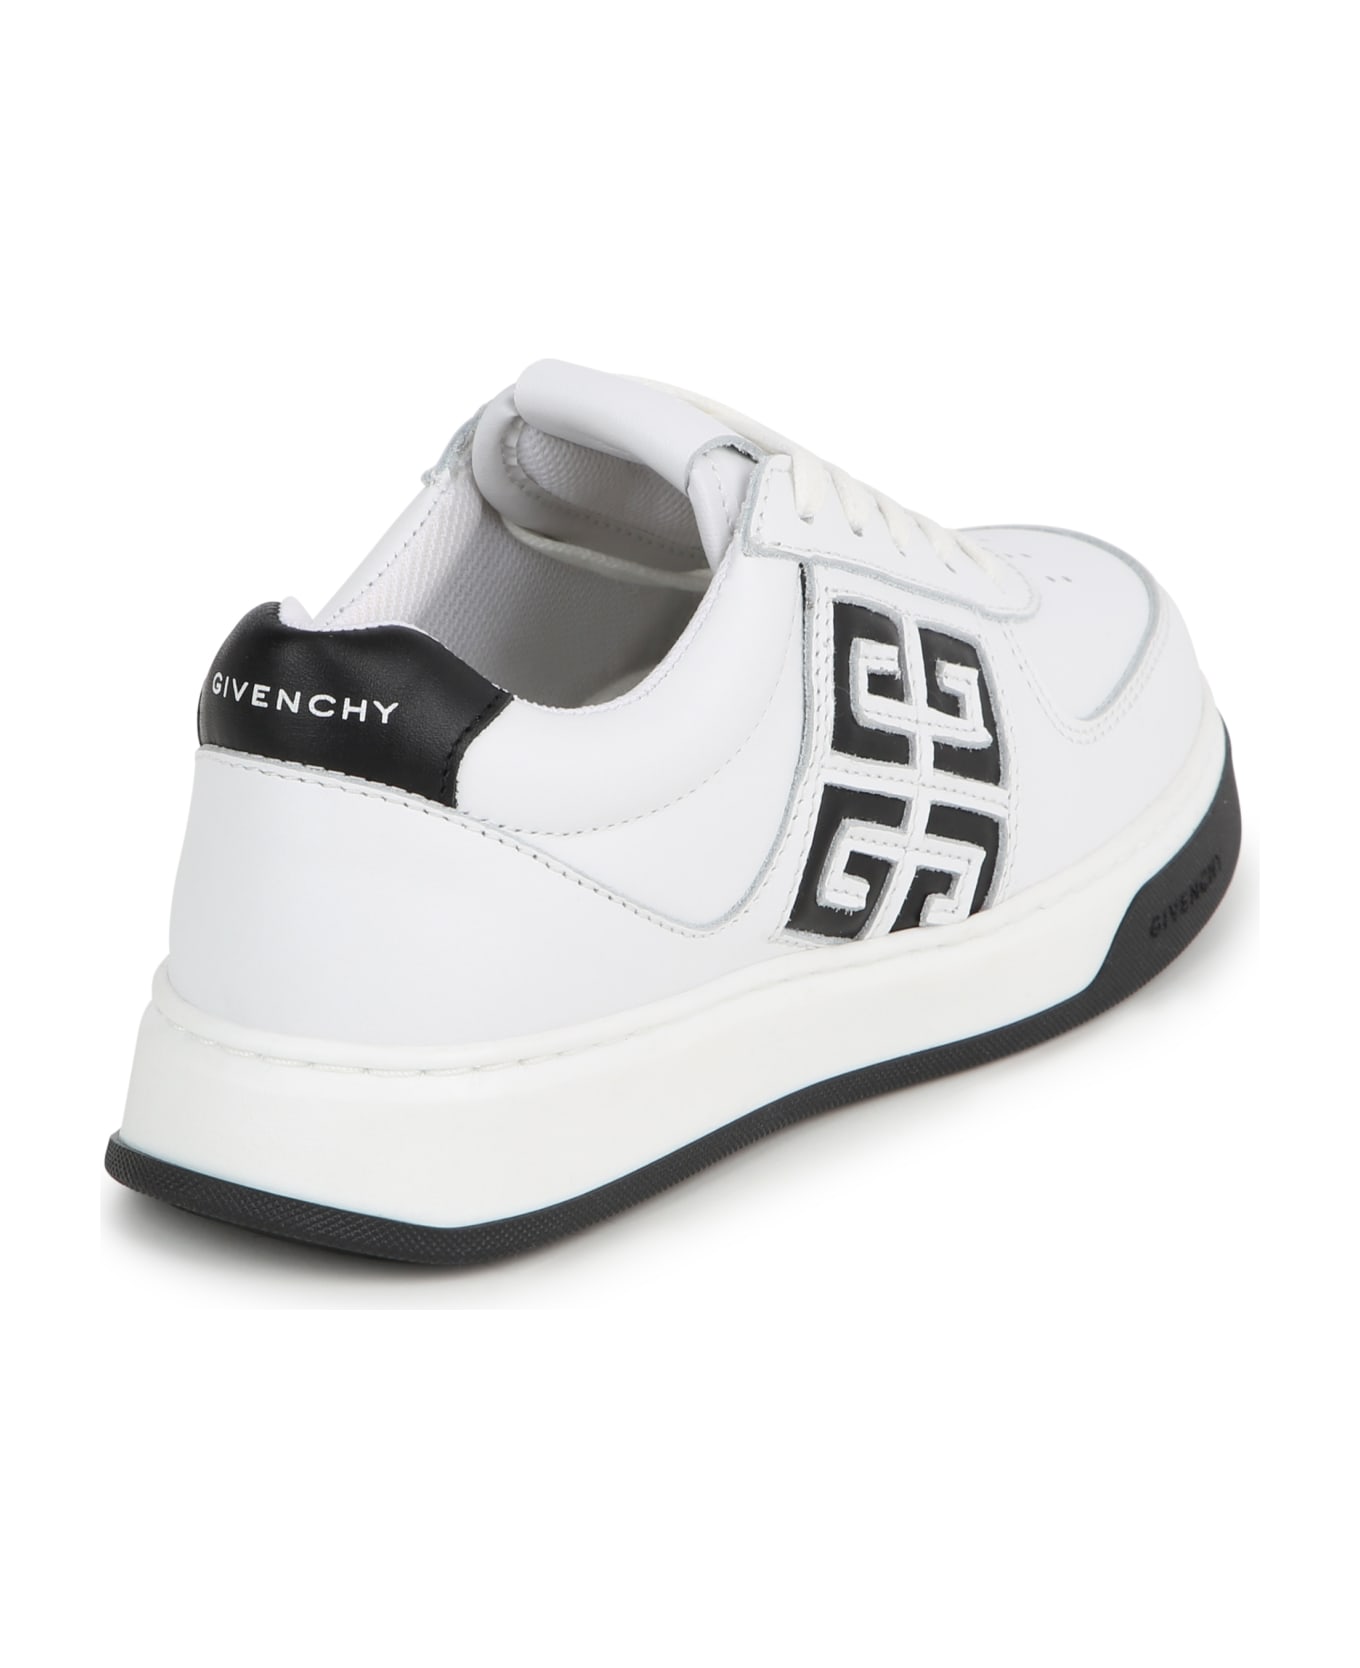 Givenchy 4g Leather Sneakers - Bianco シューズ